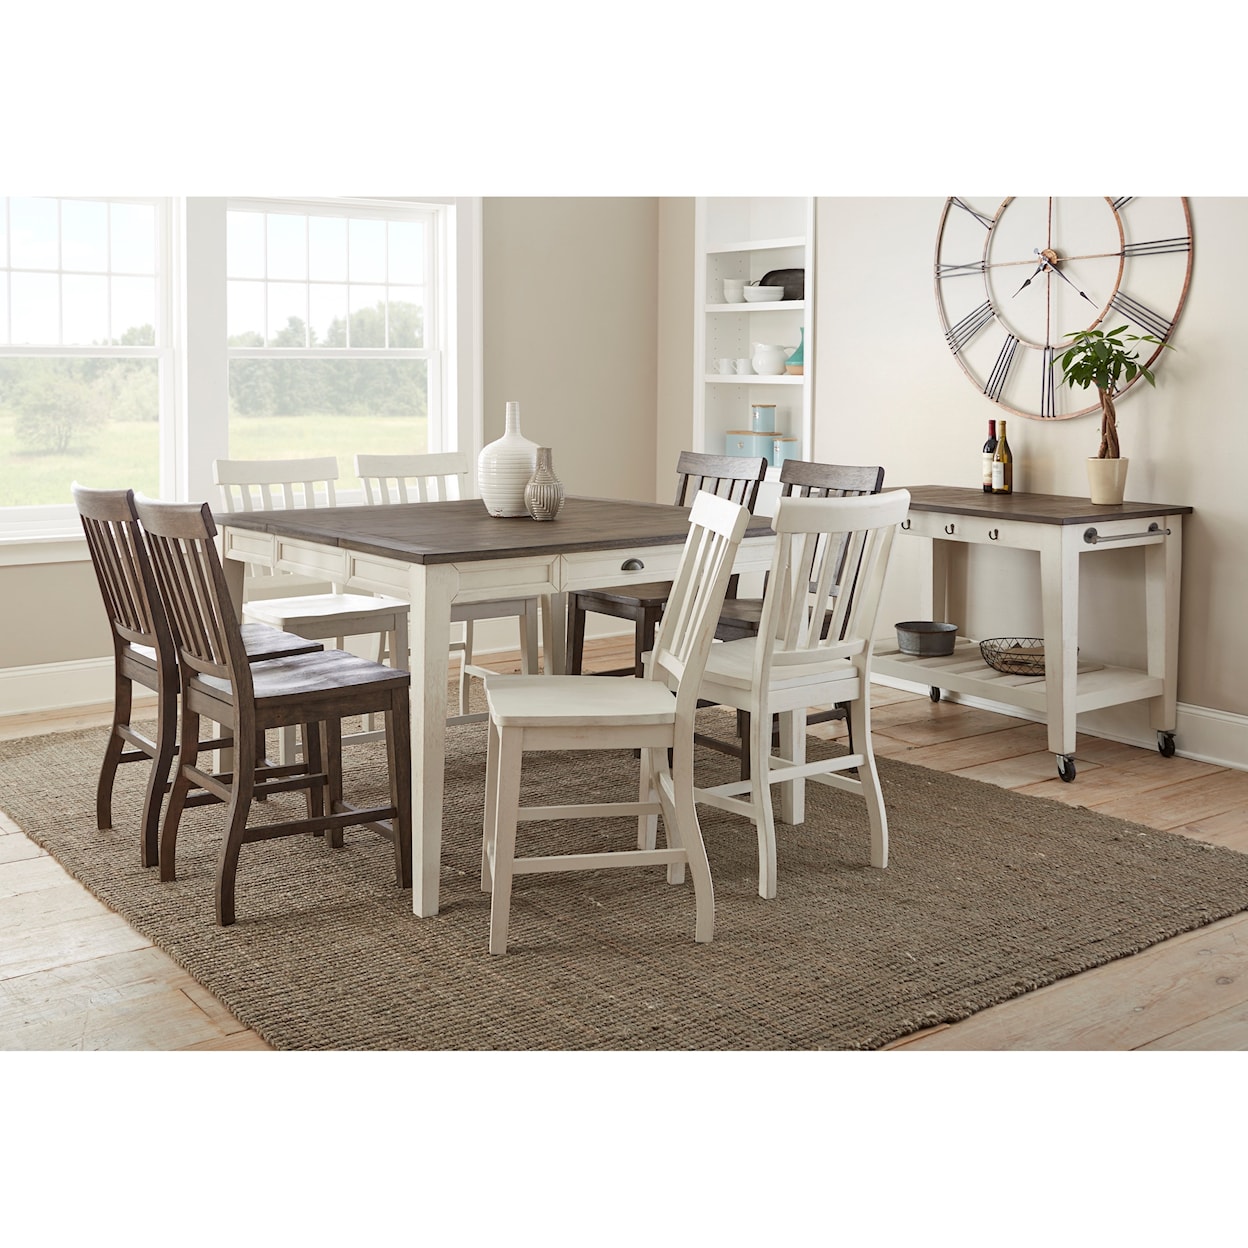 Steve Silver Cayla Casual Dining Room Group